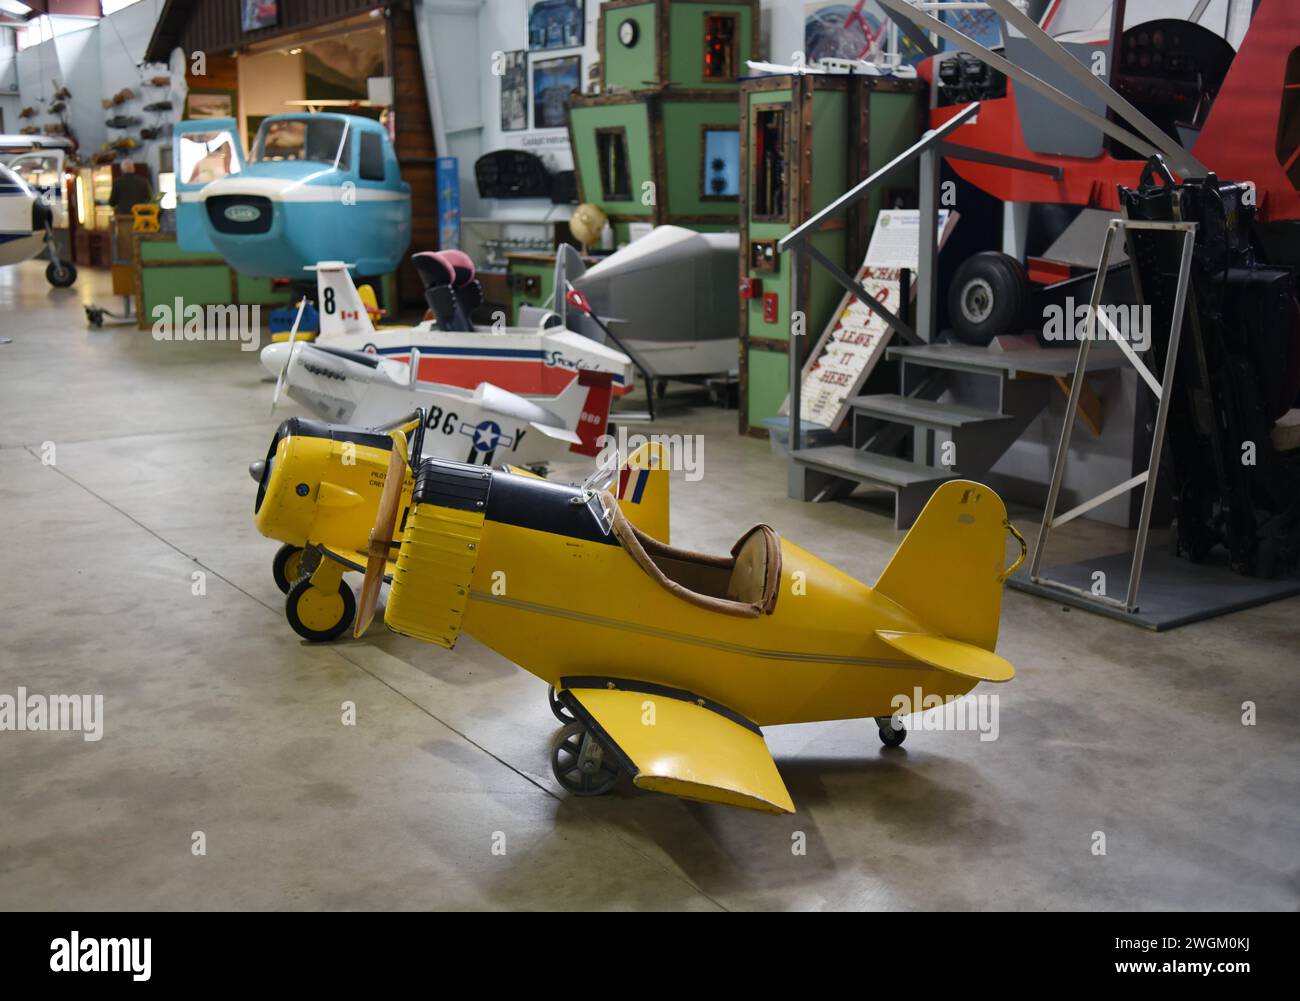 Children’s toy aircraft on display at the British Columbia Aviation Museum in Sidney, British Columbia Stock Photo